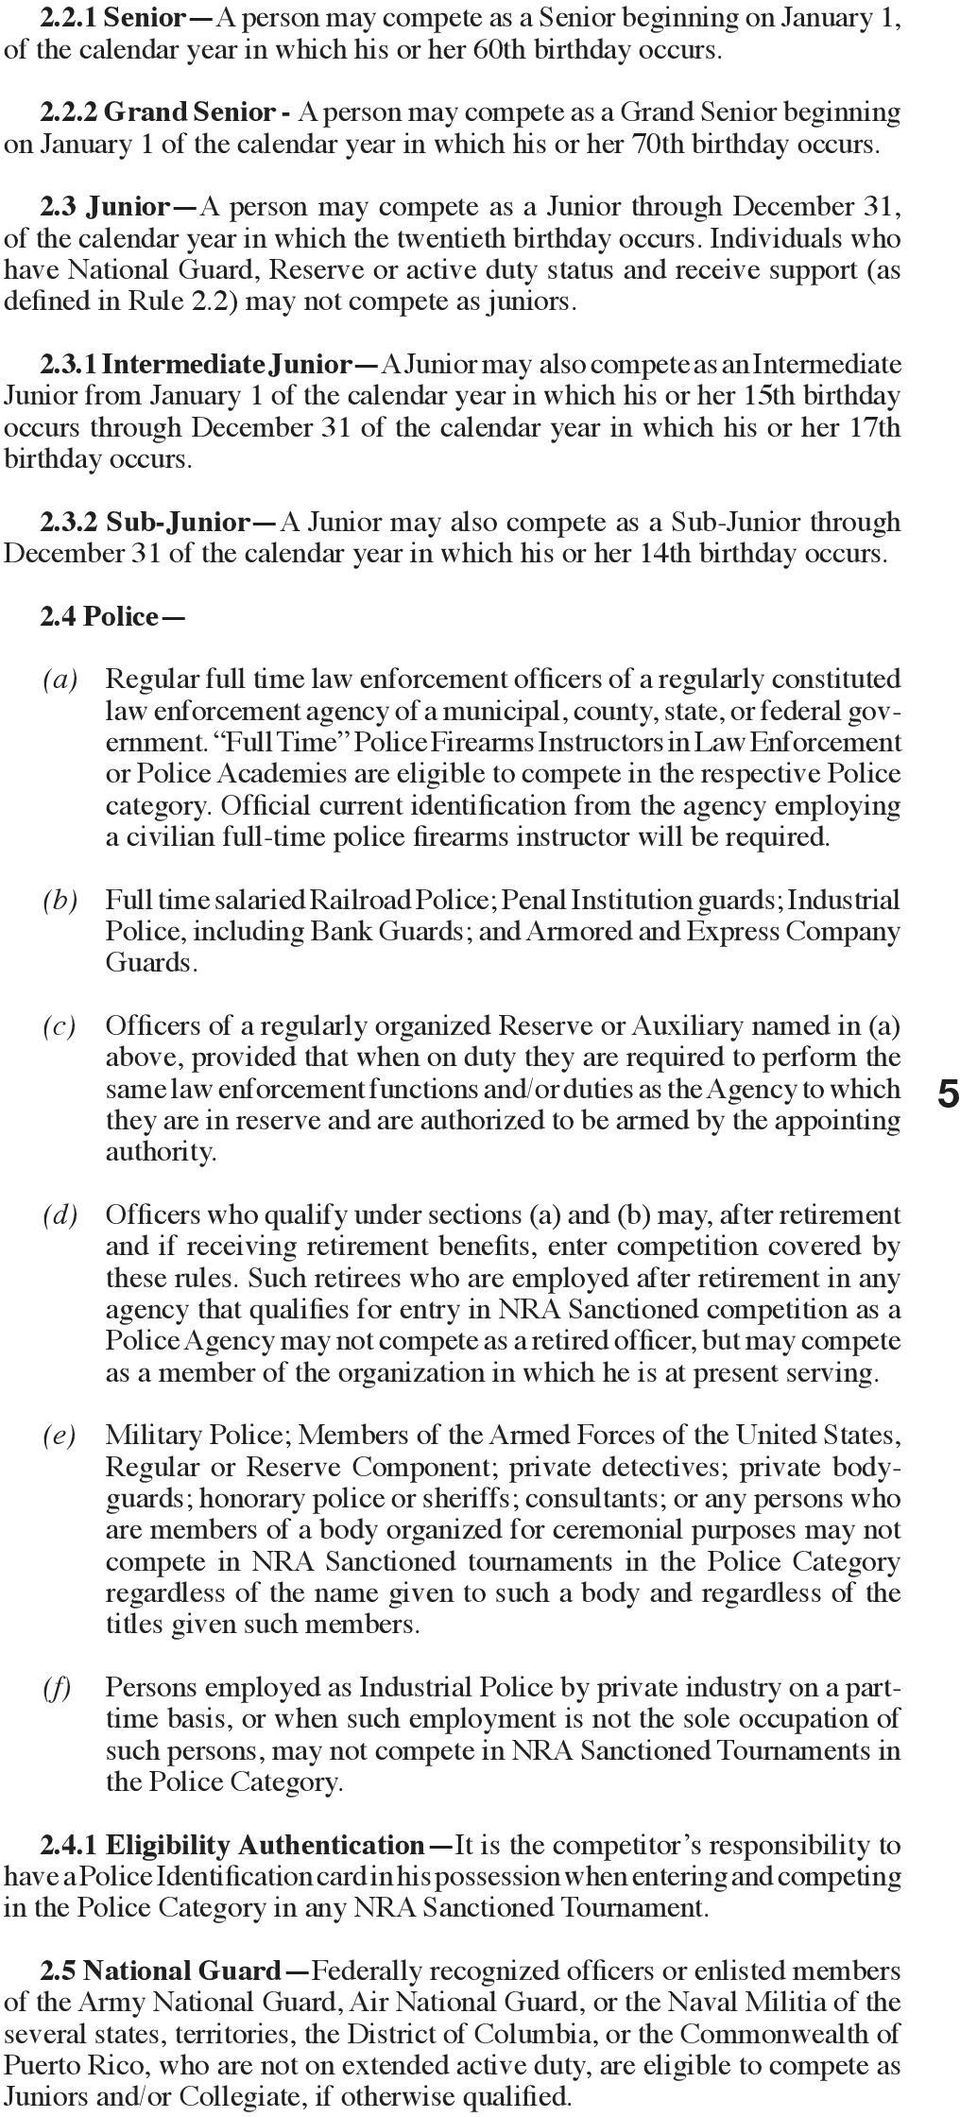 Individuals who have National Guard, Reserve or active duty status and receive support (as defined in Rule 2.2) may not compete as juniors. 2.3.